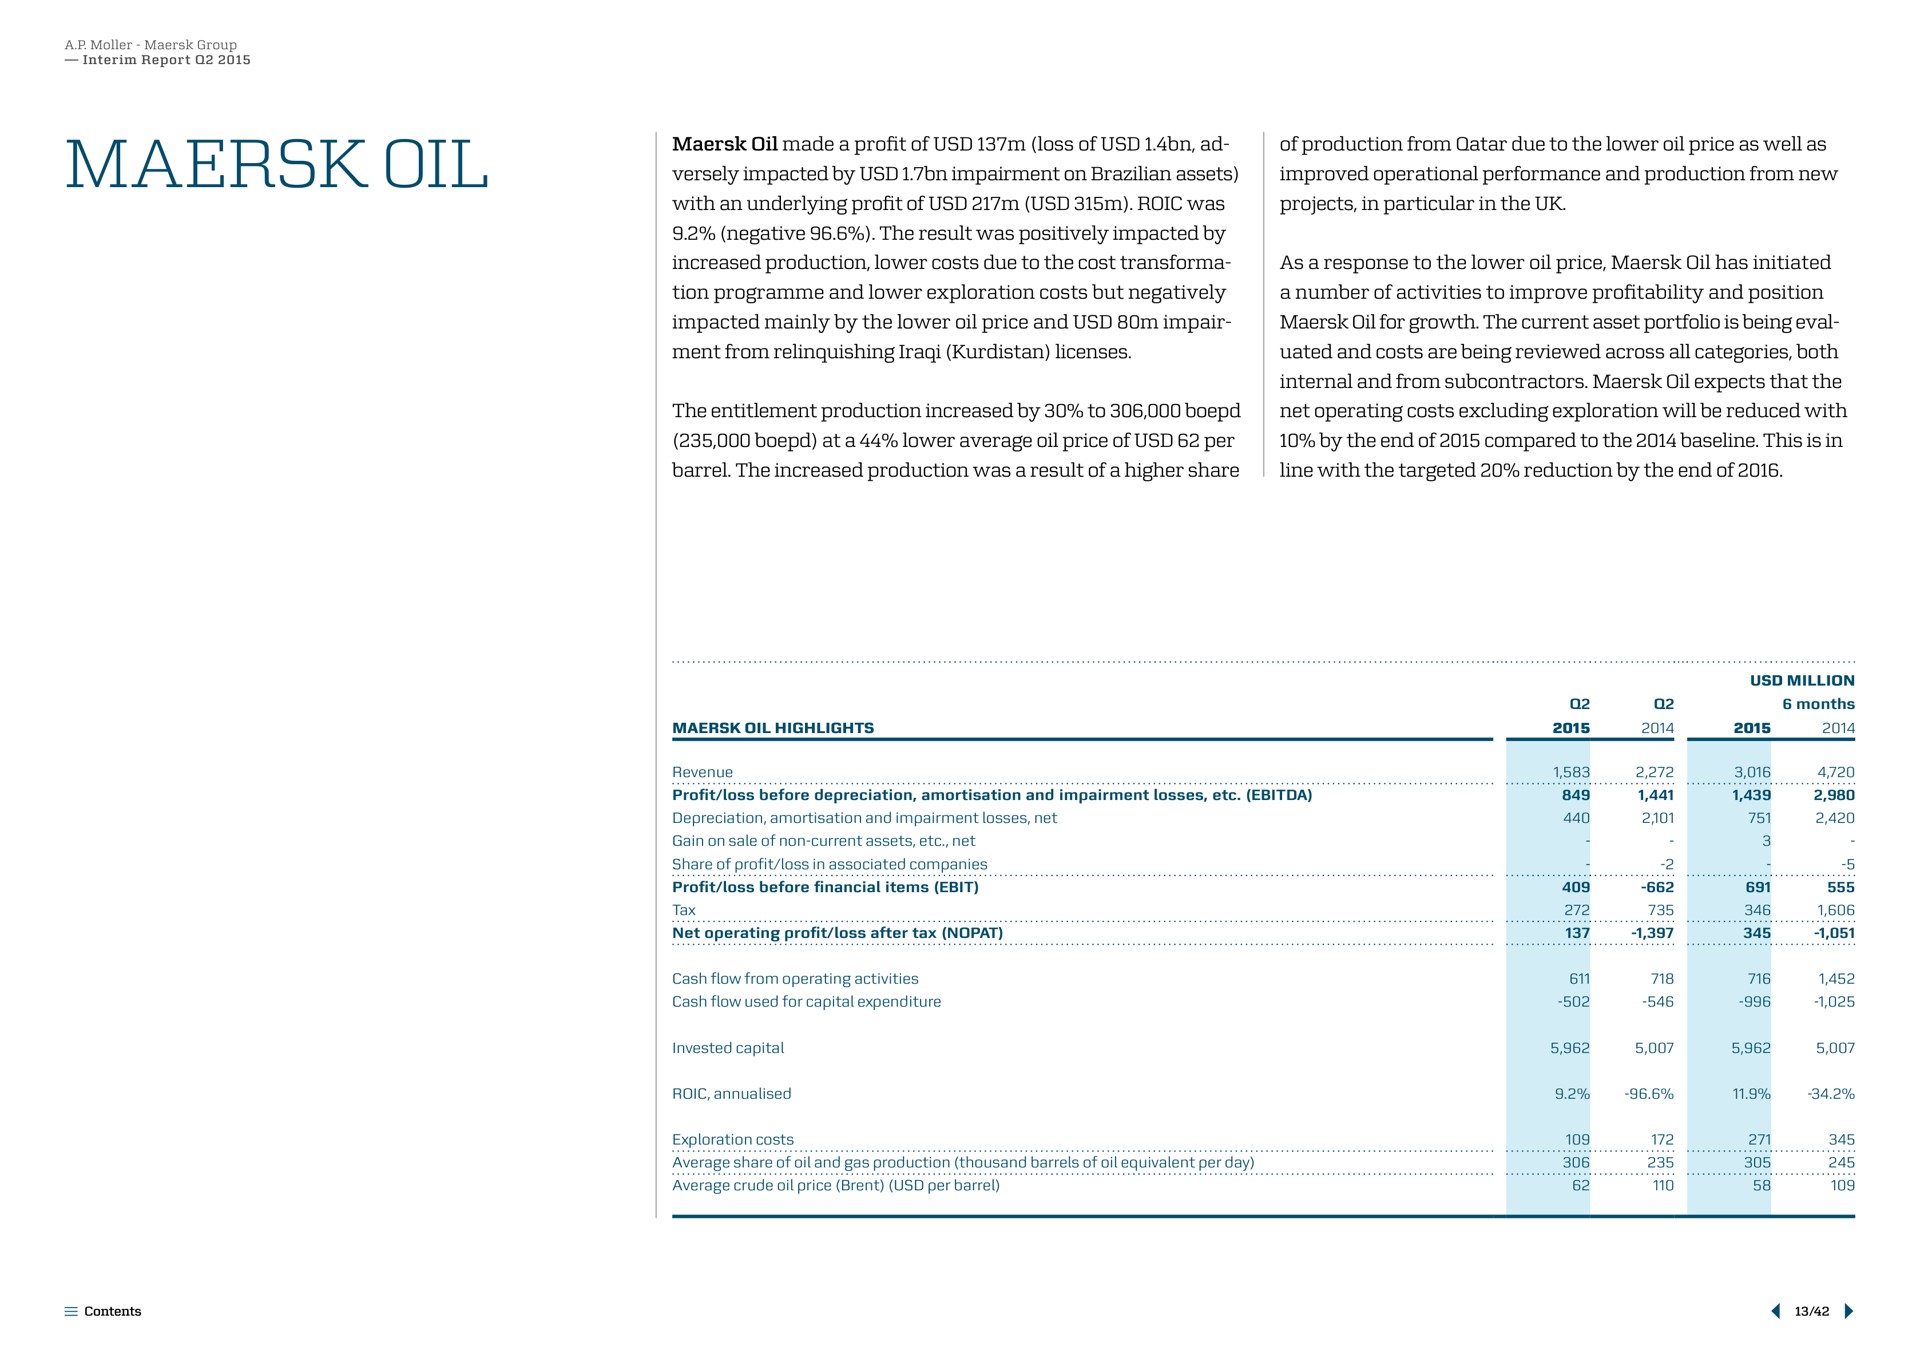 oil impacted by impairment on assets improved operational performance and production from new negative the result was positively impacted by increased production lower costs due to the cost as a response to the lower price has initiated impacted mainly by the lower price and impair for growth the current asset portfolio is being internal and from subcontractors expects that the net operating costs excluding exploration will be reduced with barrel the increased production was a result of a higher share line with the targeted reduction by the end of | Maersk